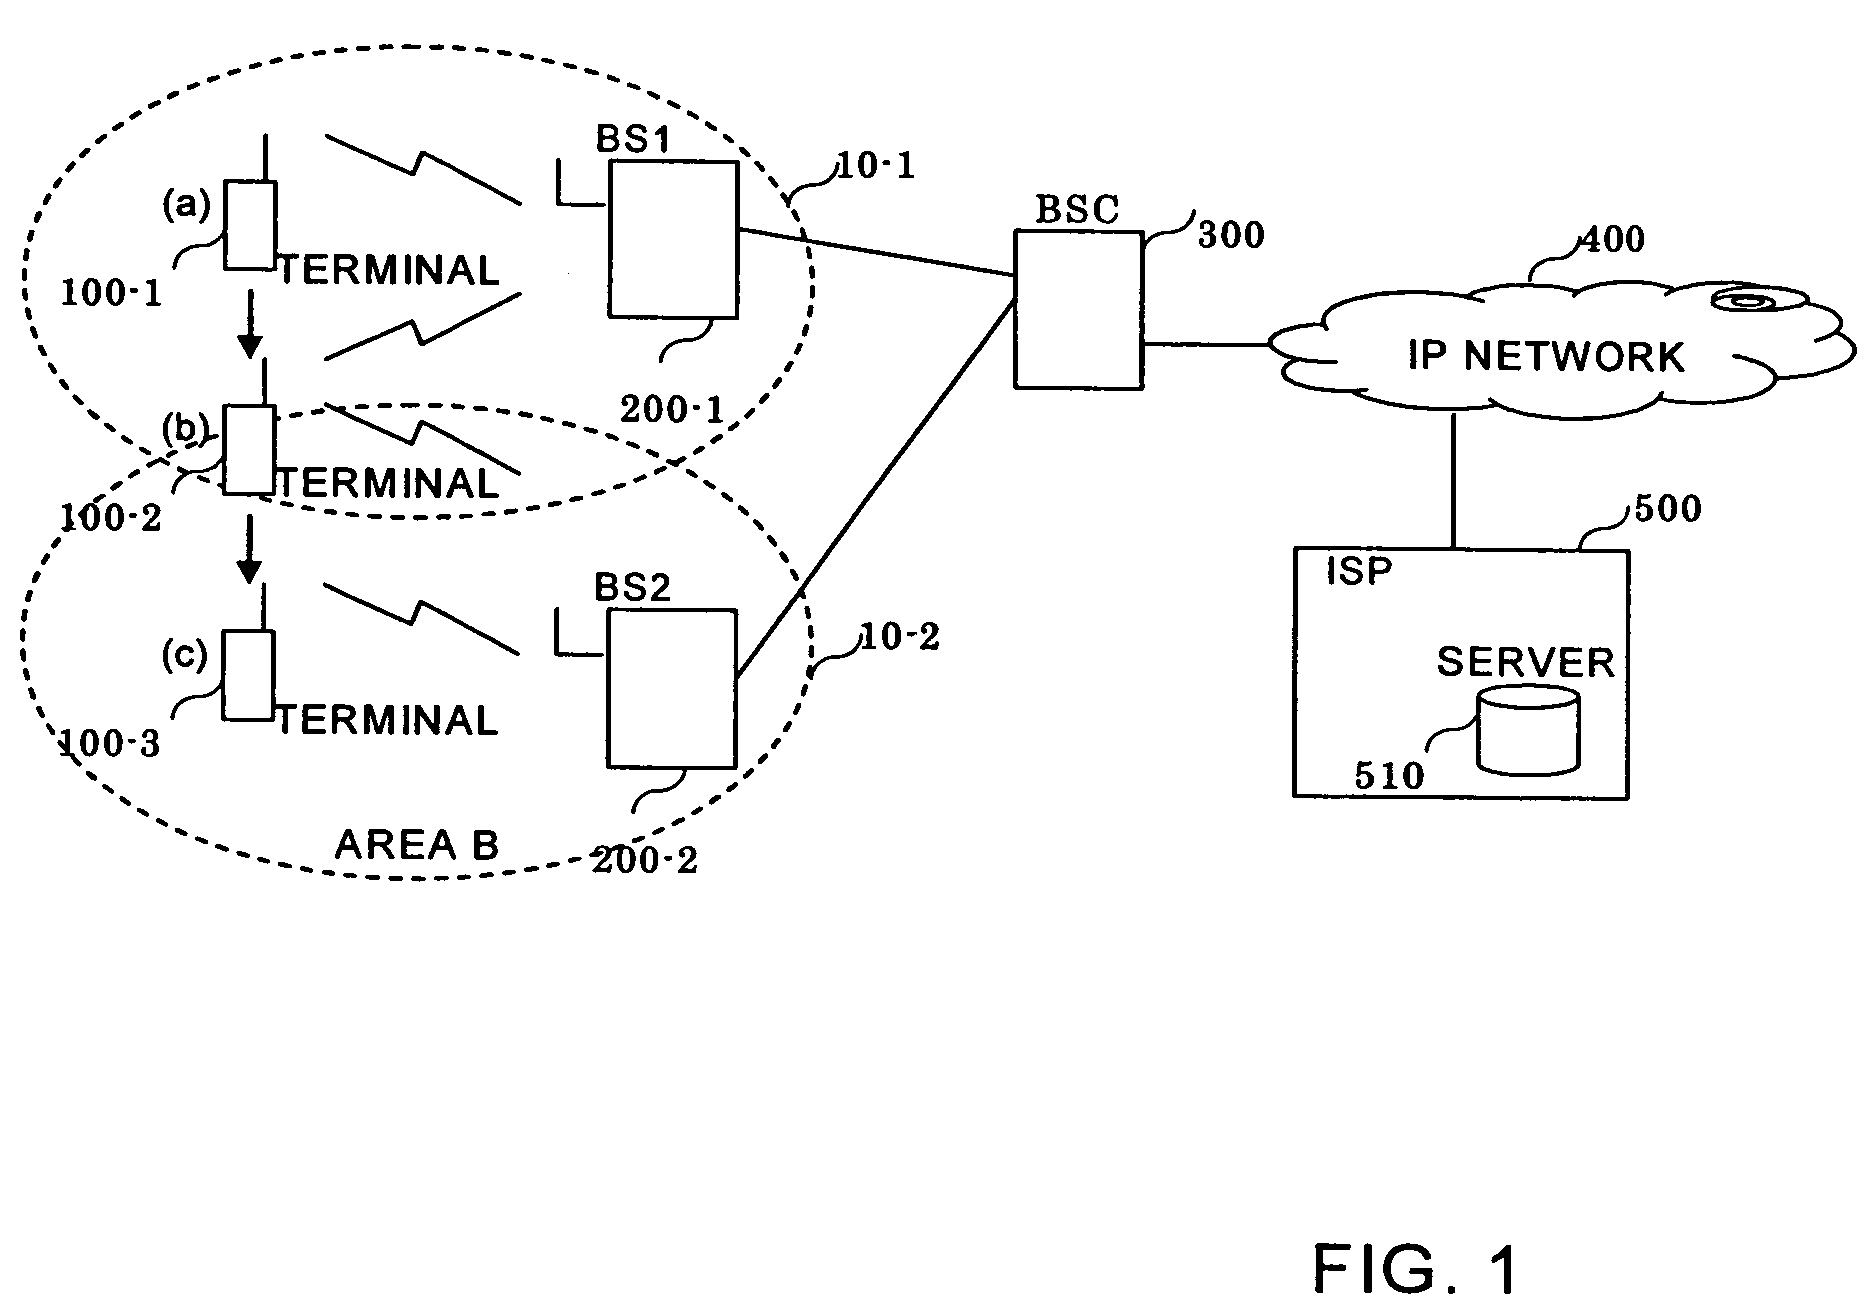 System and method for reducing a no-communication period during hand-off